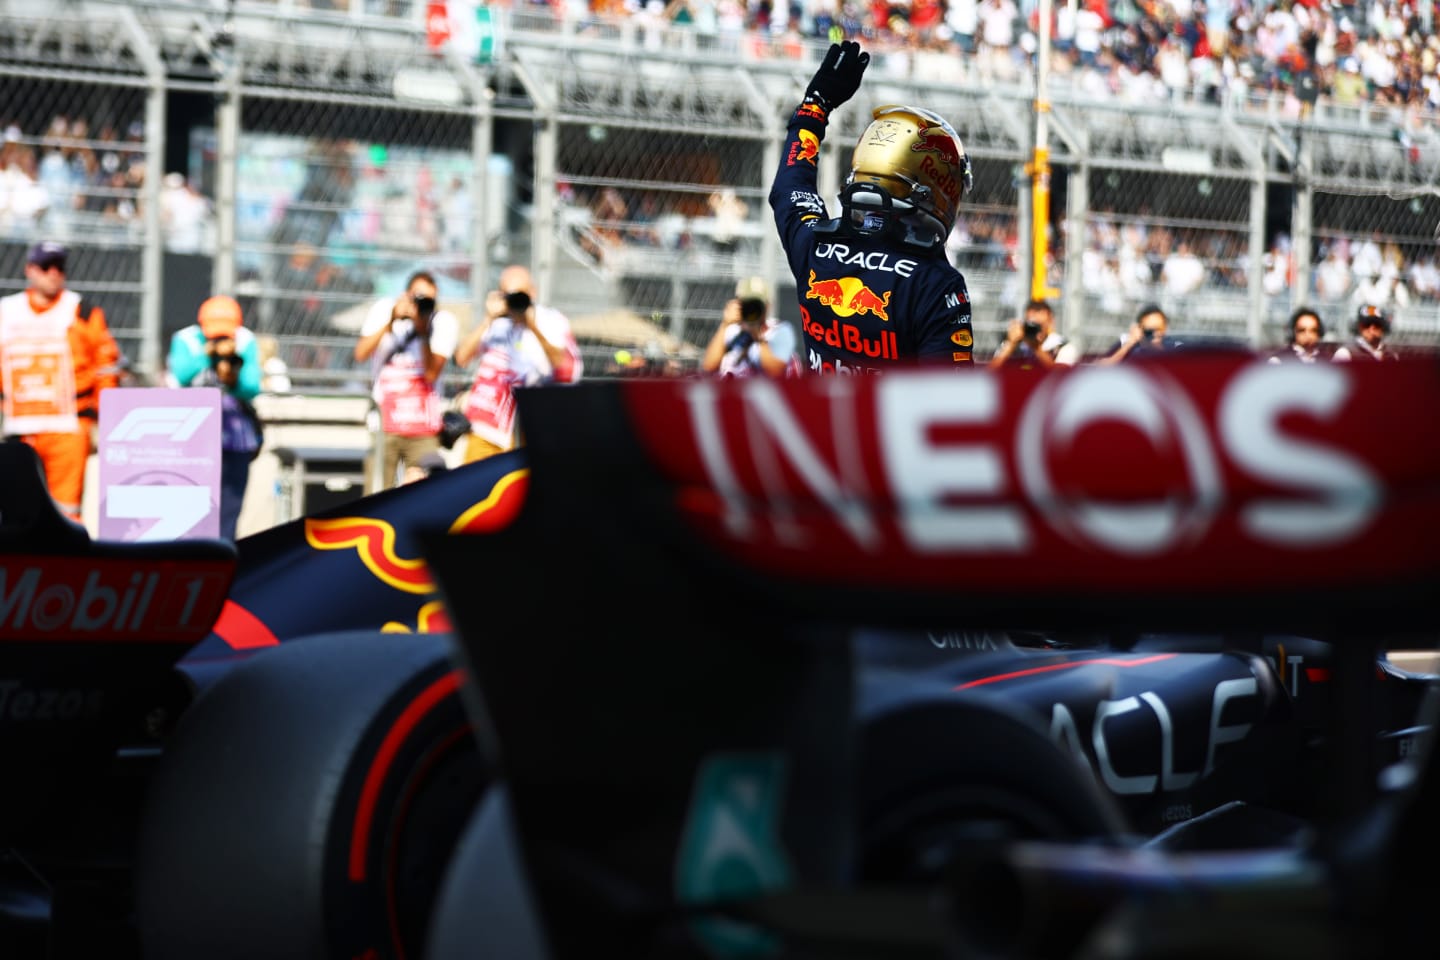 MEXICO CITY, MEXICO - OCTOBER 29: Pole position qualifier Max Verstappen of the Netherlands and Oracle Red Bull Racing celebrates in parc ferme during qualifying ahead of the F1 Grand Prix of Mexico at Autodromo Hermanos Rodriguez on October 29, 2022 in Mexico City, Mexico. (Photo by Mark Thompson/Getty Images )